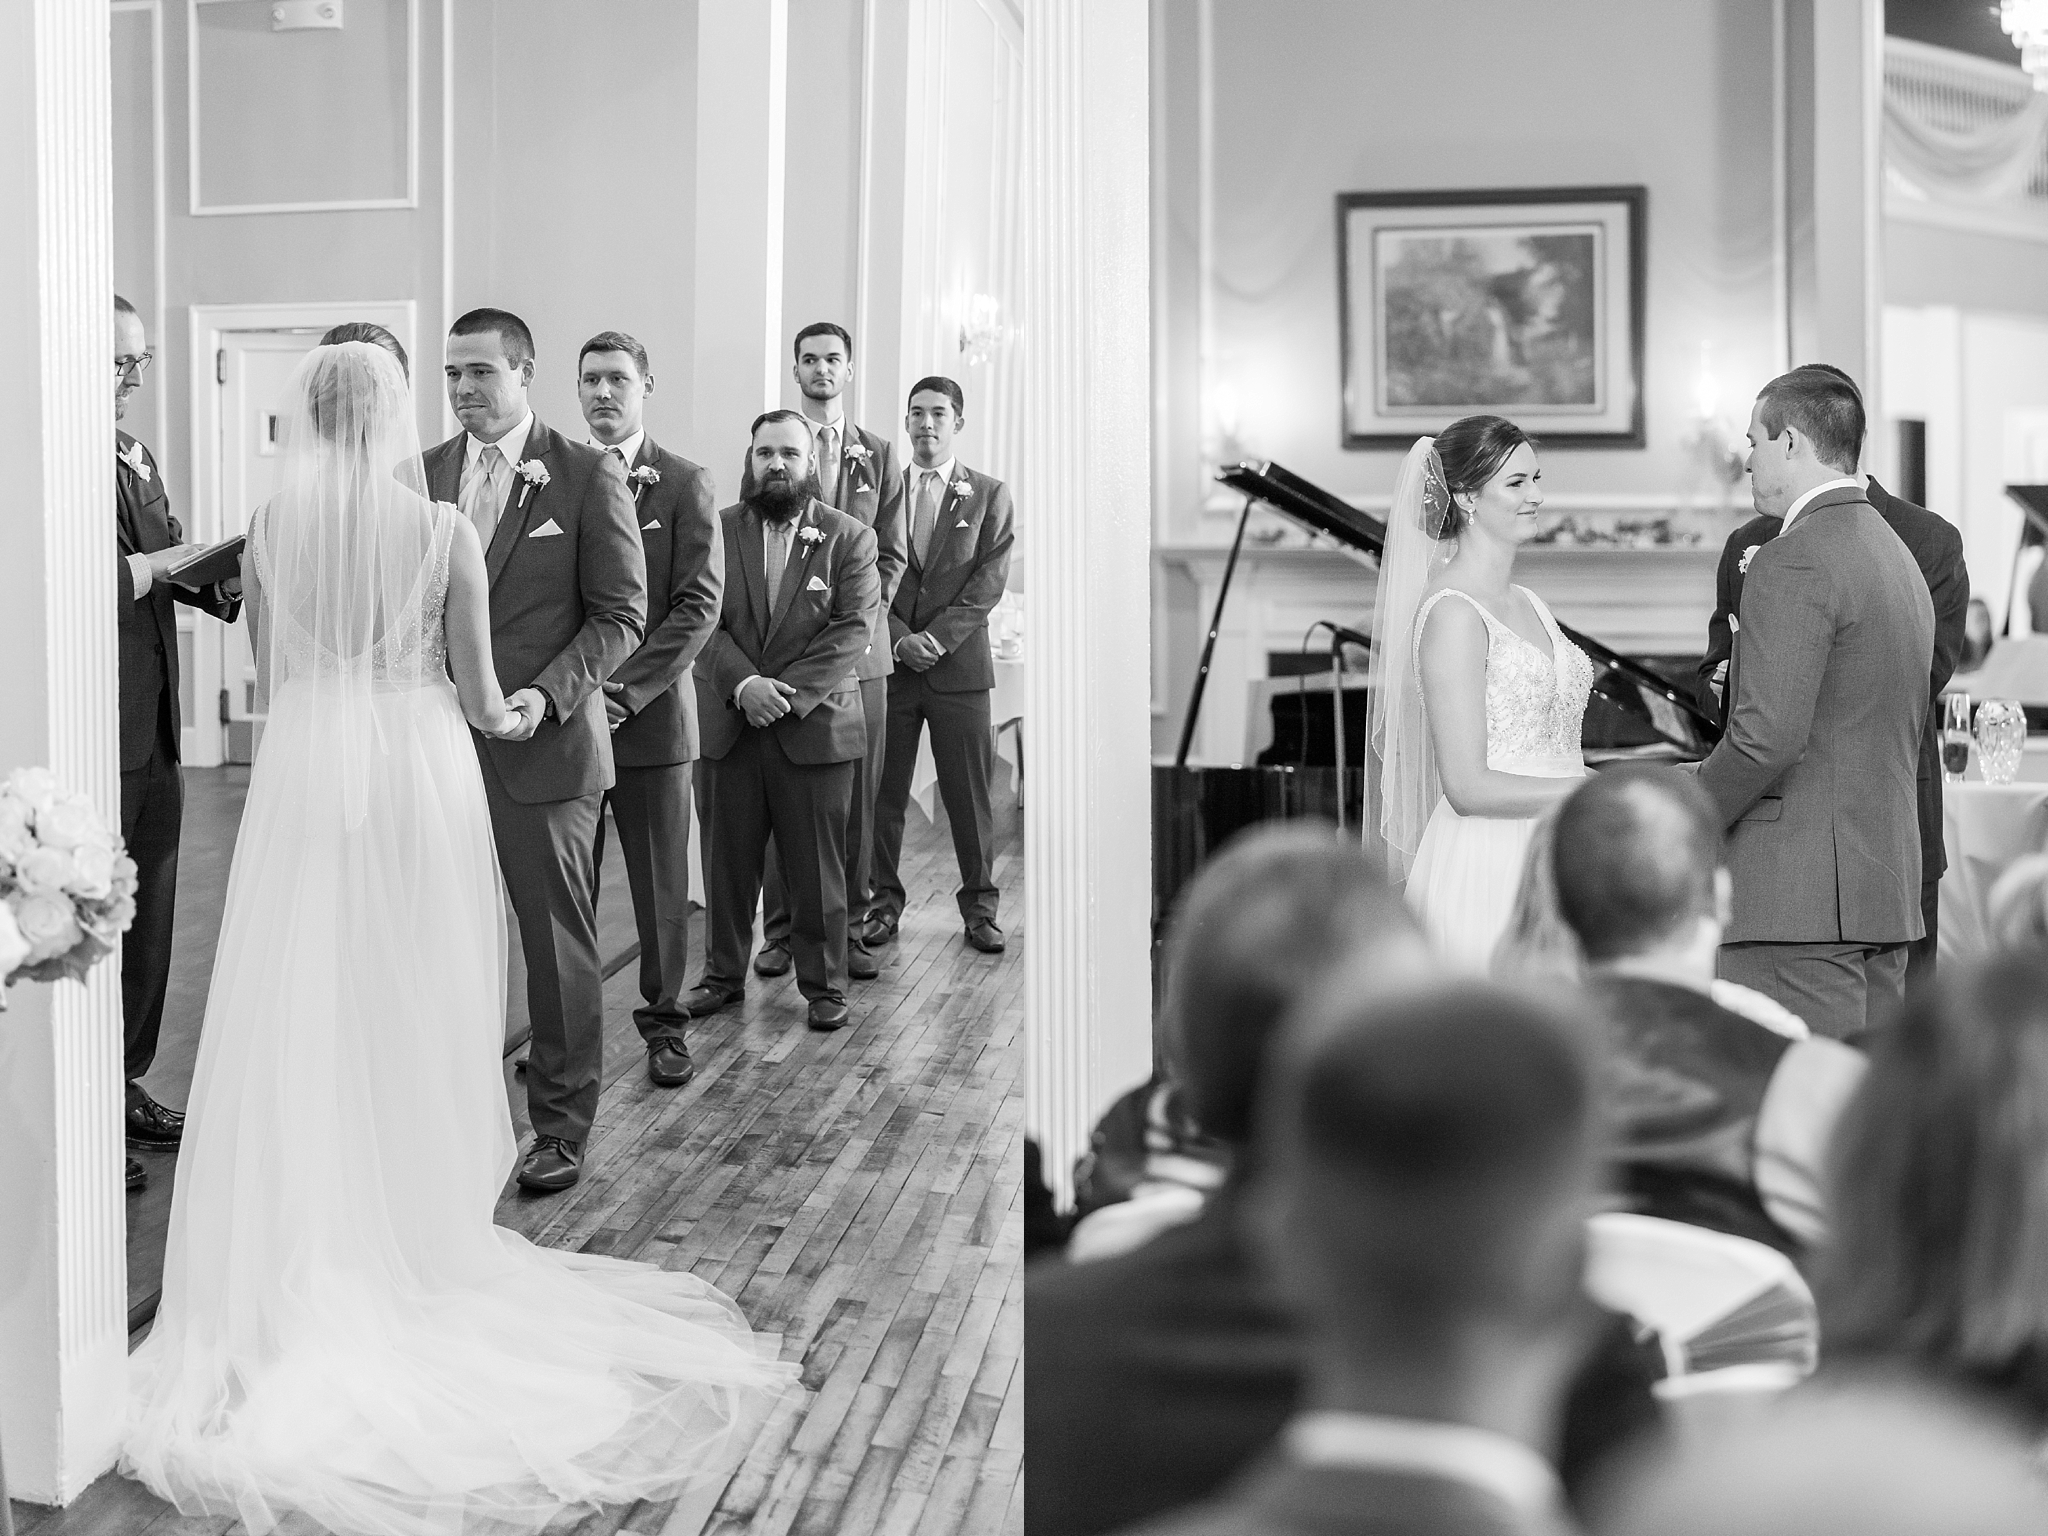 classic-intimate-fun-wedding-photos-at-the-meeting-house-grand-ballroom-in-plymouth-michigan-by-courtney-carolyn-photography_0027.jpg